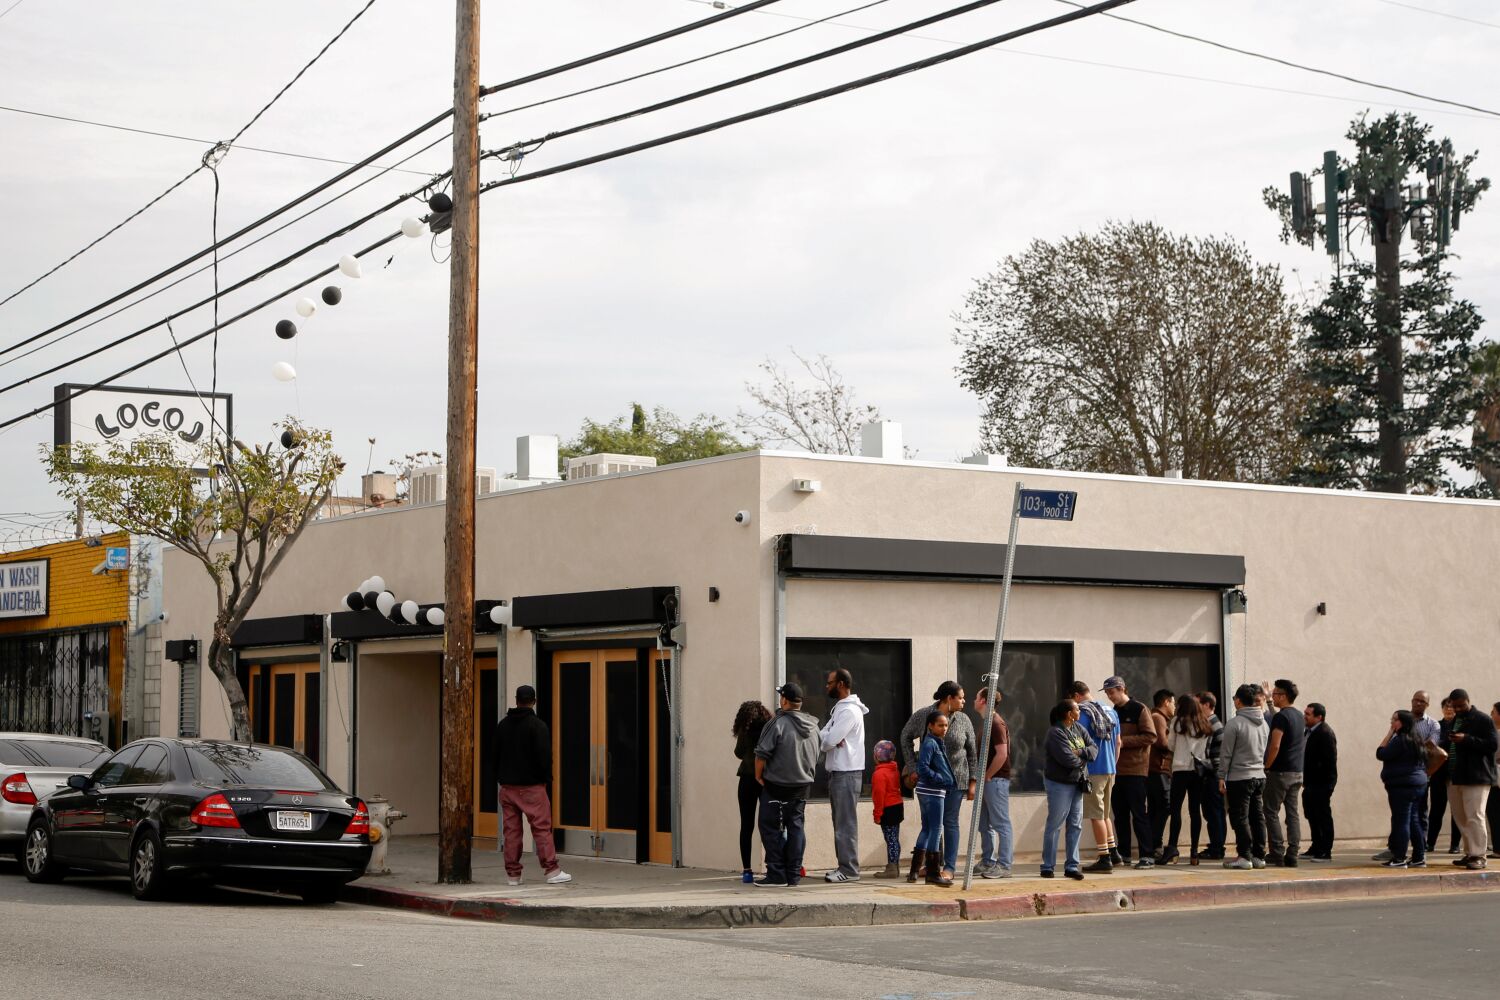 Community-focused Locol rises again in Watts, this time as a nonprofit restaurant